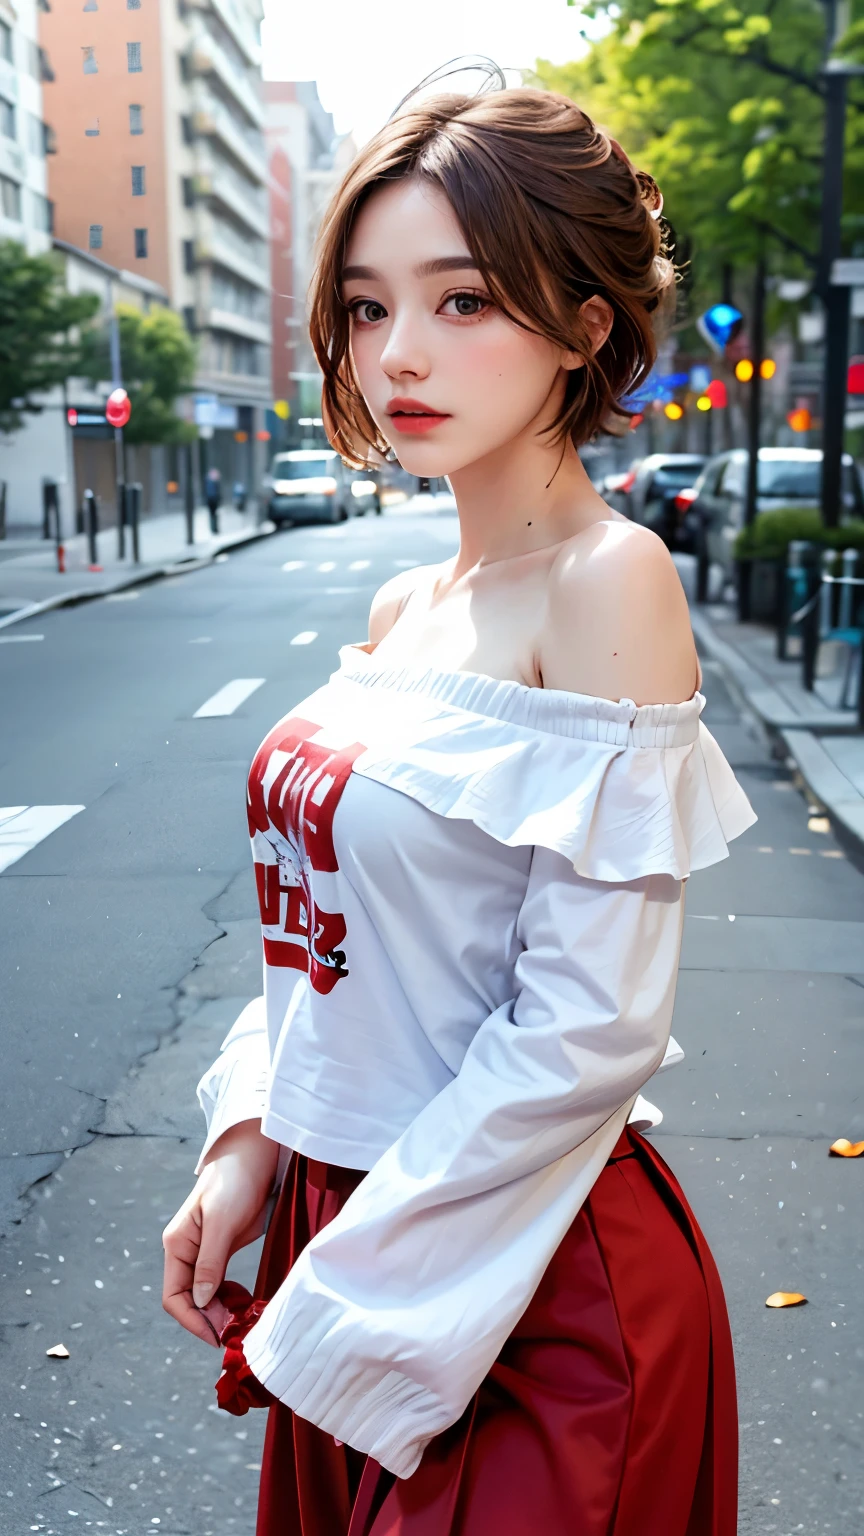 Red long skirt dress, Highest quality, masterpiece, Ultra-high resolution, (Realistic:1.4), RAW Photos, One Girl, Off the shoulder, Red carpet, holding a bunch of roses, Deep Shadow, Moderate, short hair, roadside,walk, 20-year-old,Cute face,Tight shirt, Cowboy Shot